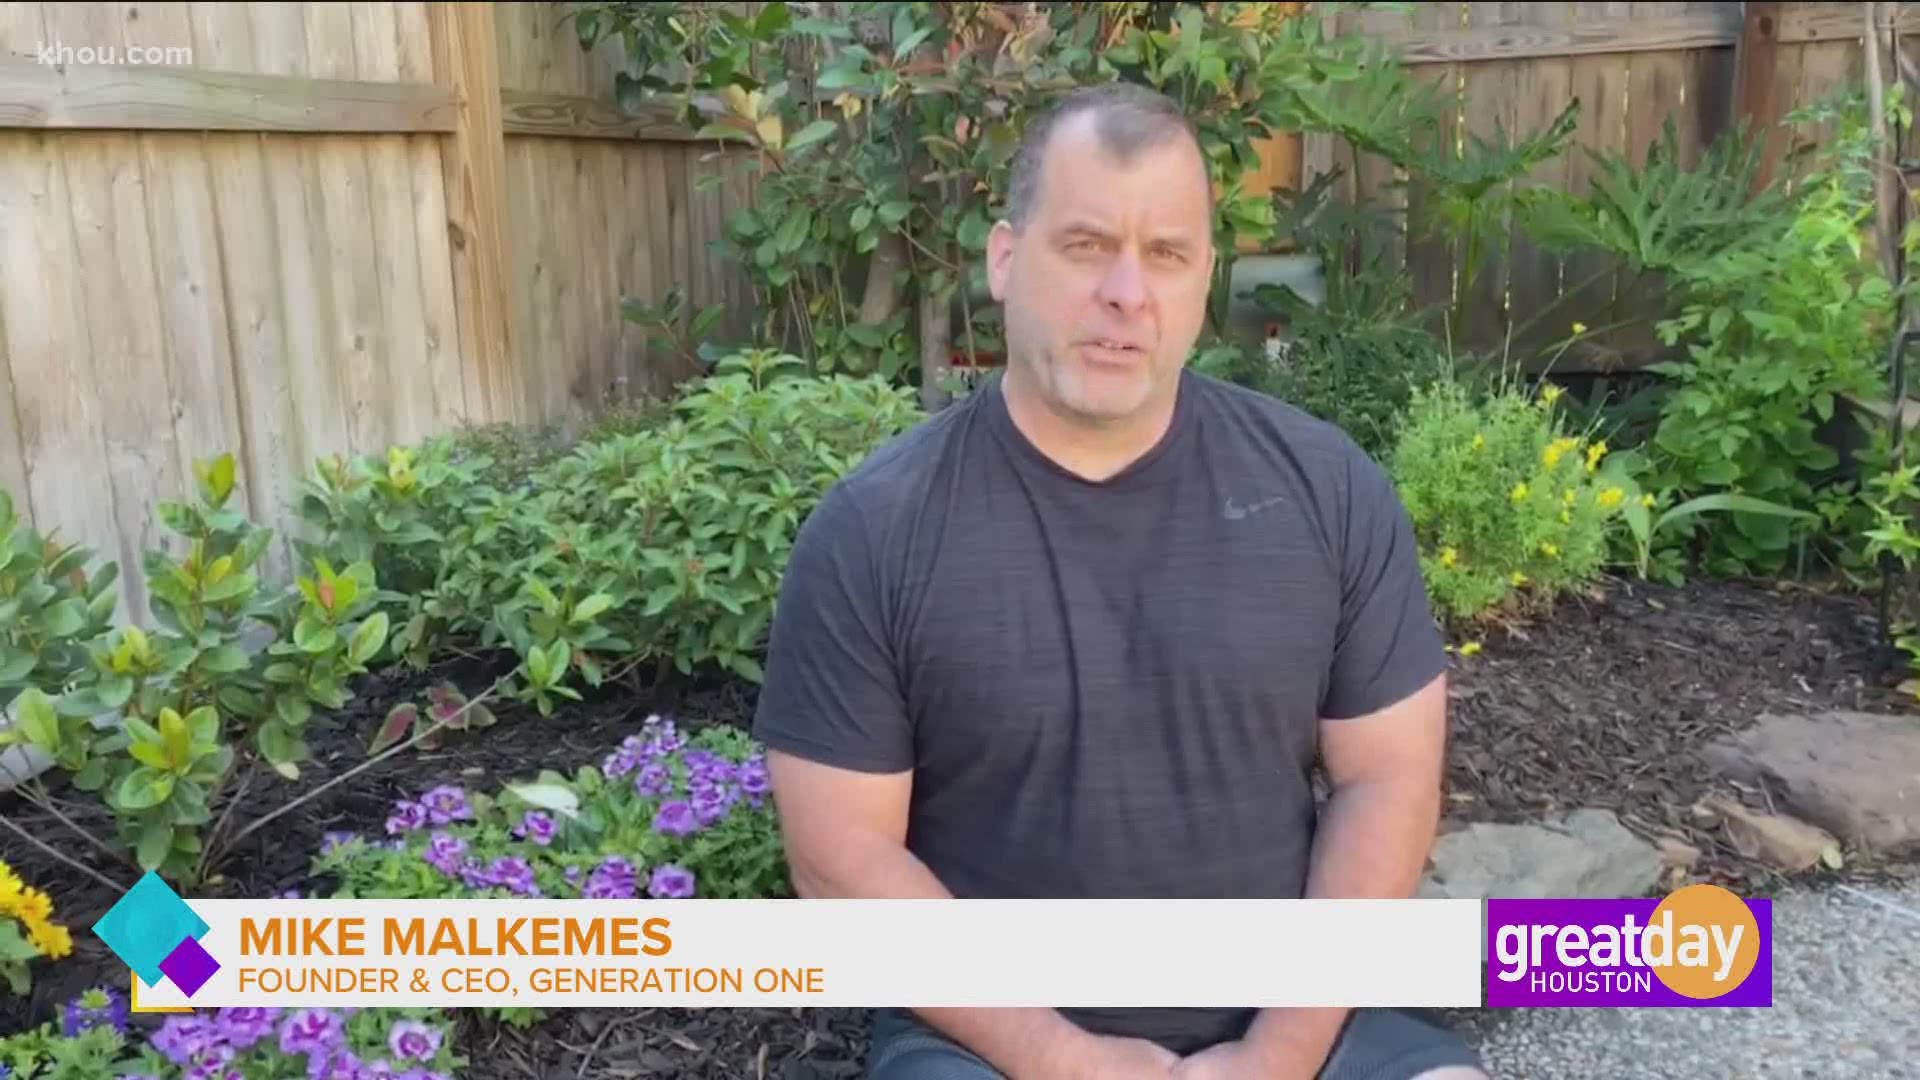 Mike Malkemes, with Generation One is helping children and families in Houston's Third Ward.